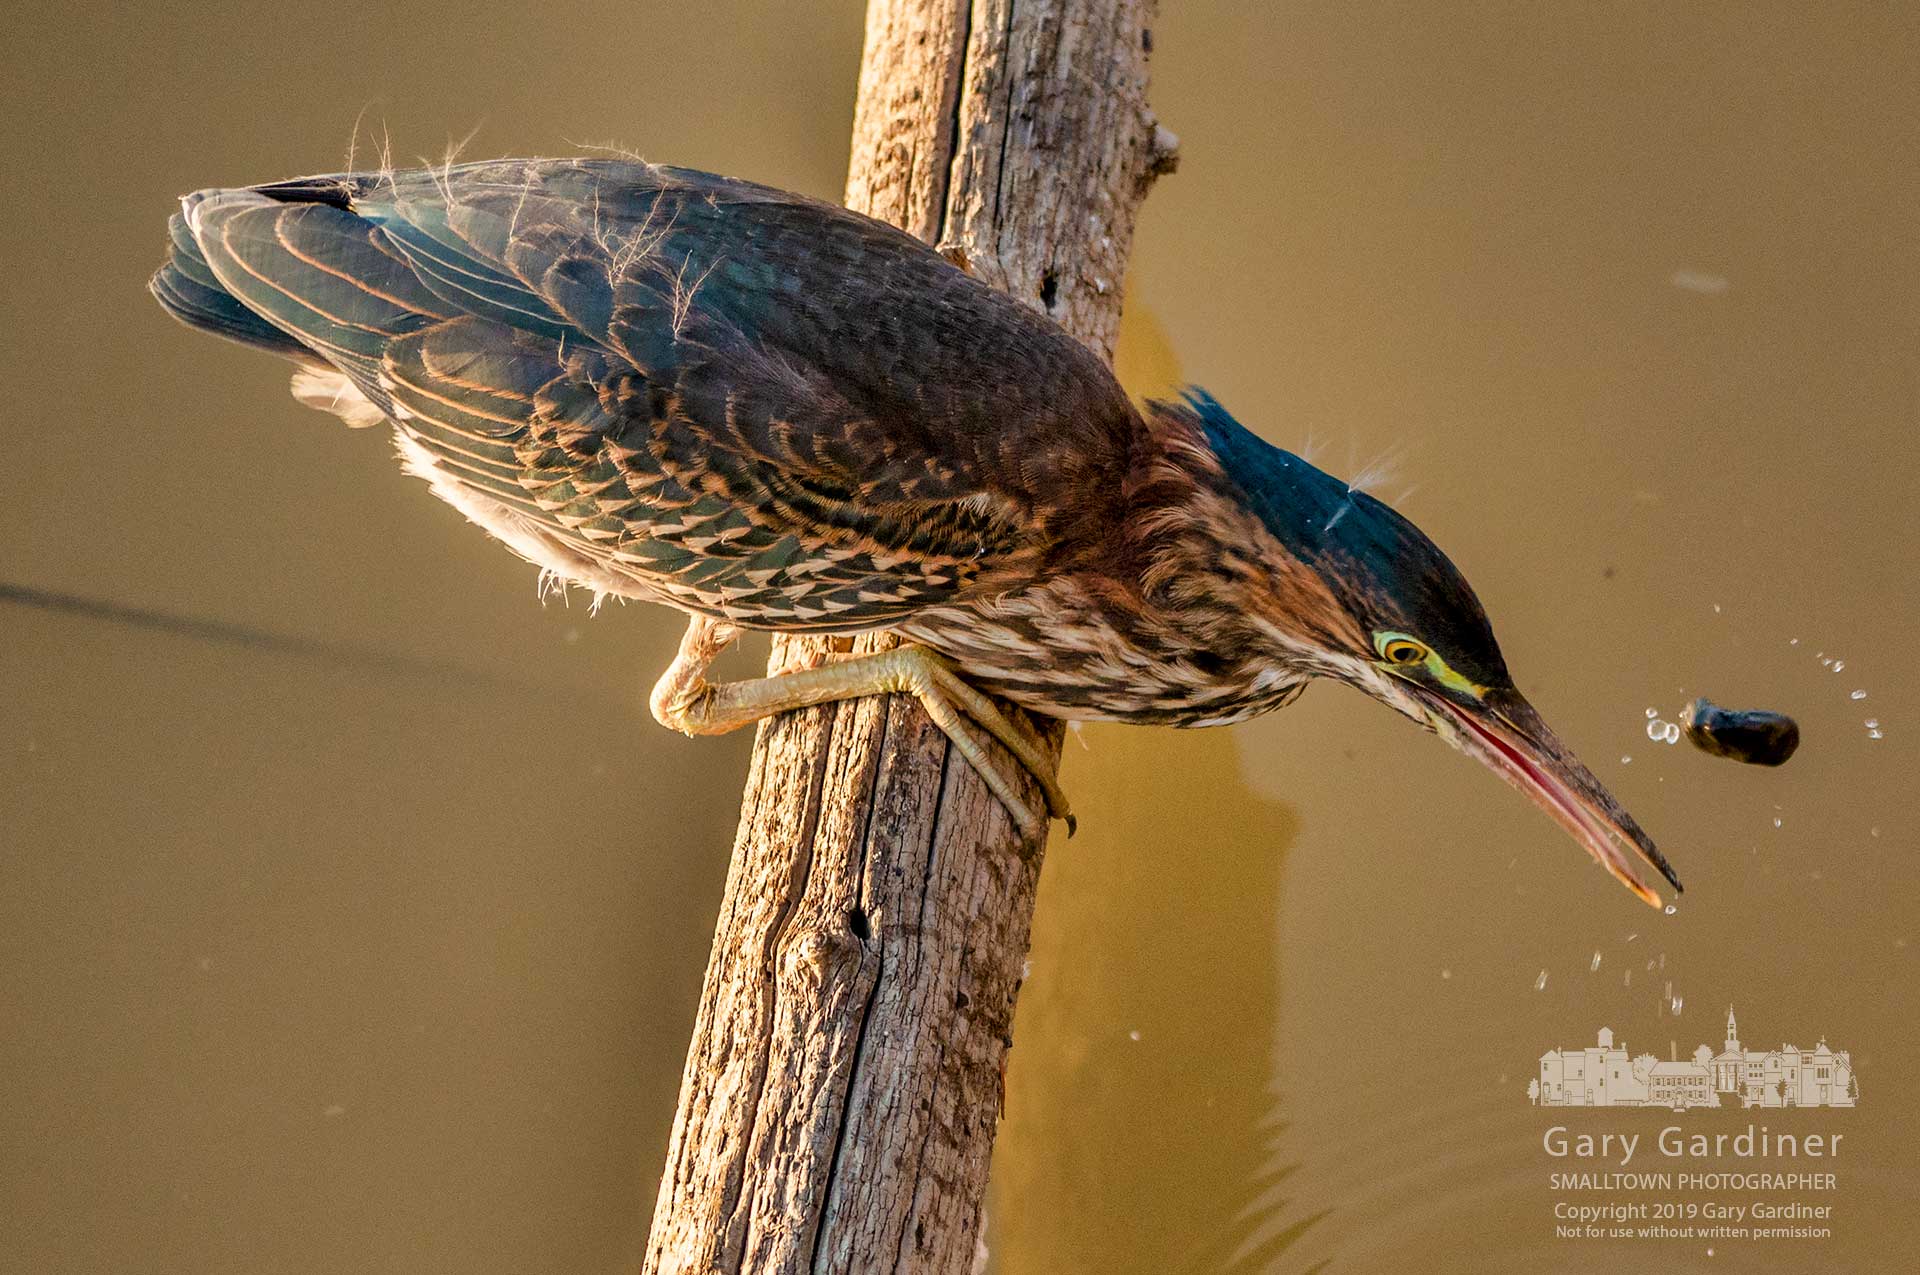 A green heron tosses a small piece of wood into the wetlands at Highlands attempting to lure a fish close enough to grab it for a meal. My Final Photo for Sept. 10, 2019.